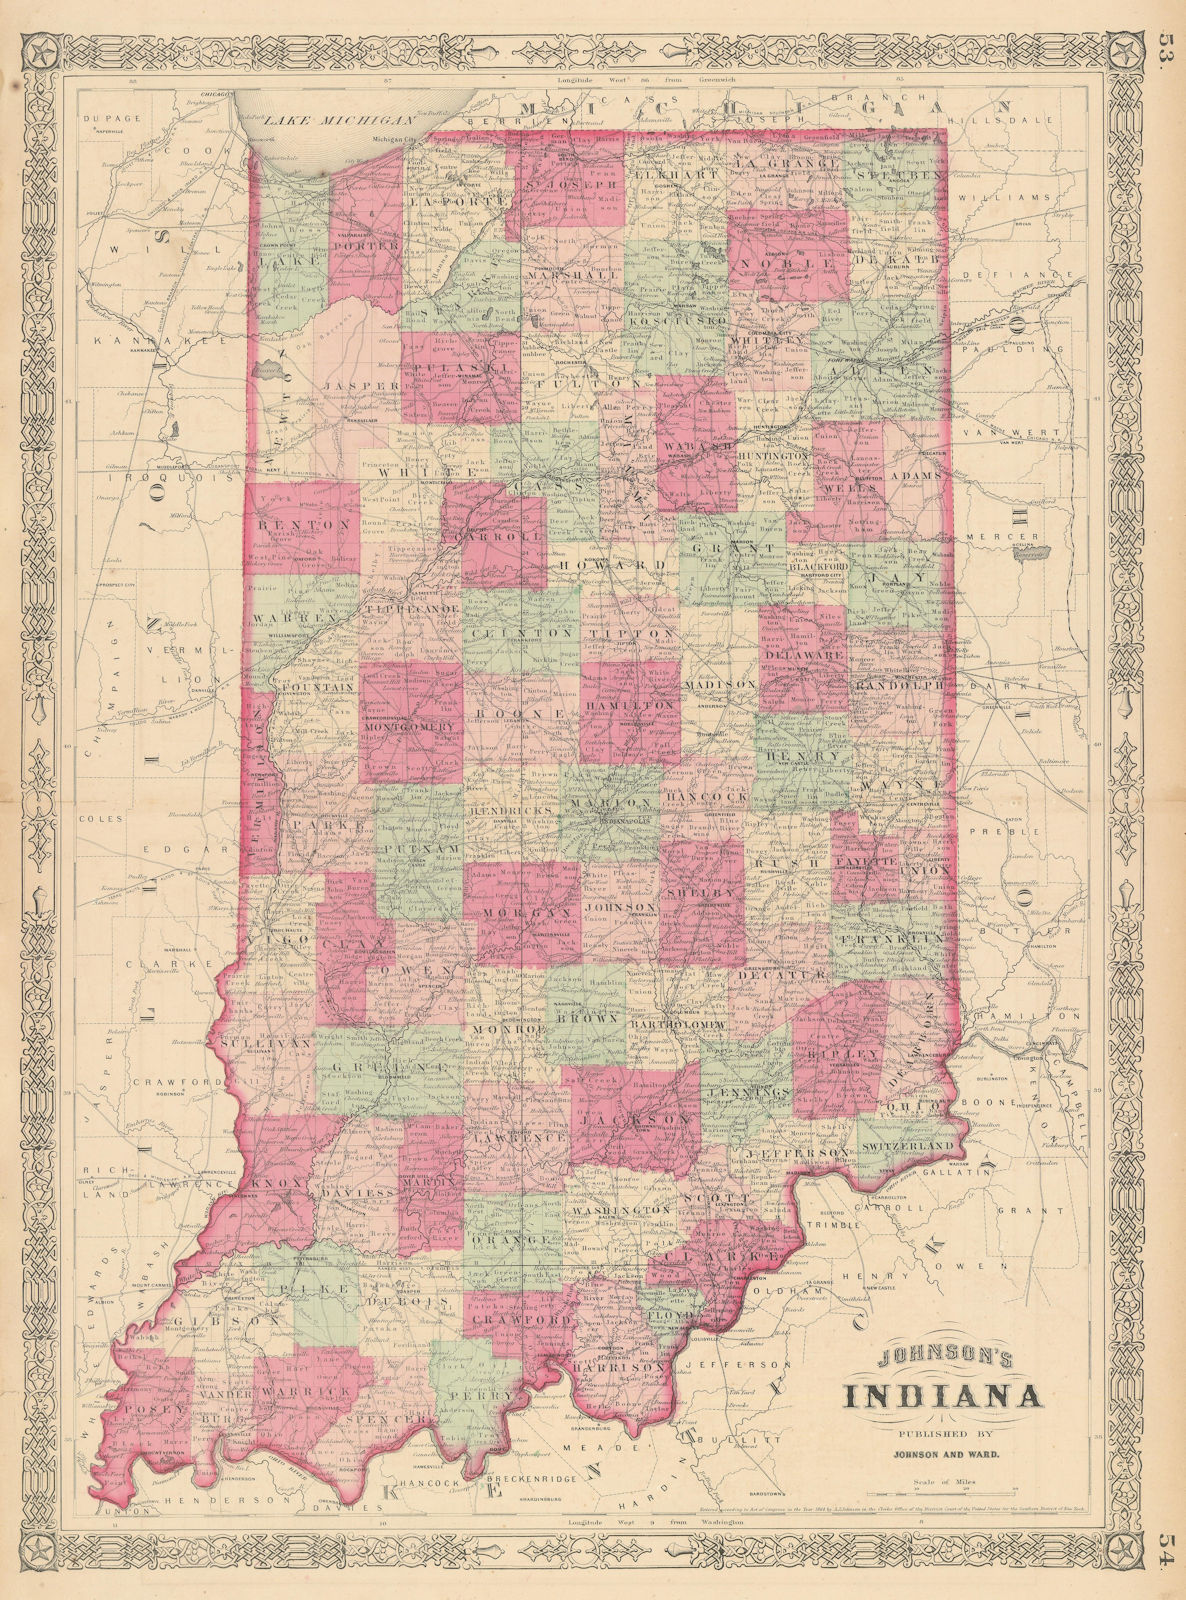 Associate Product Johnson's Indiana. US state map showing counties 1865 old antique chart